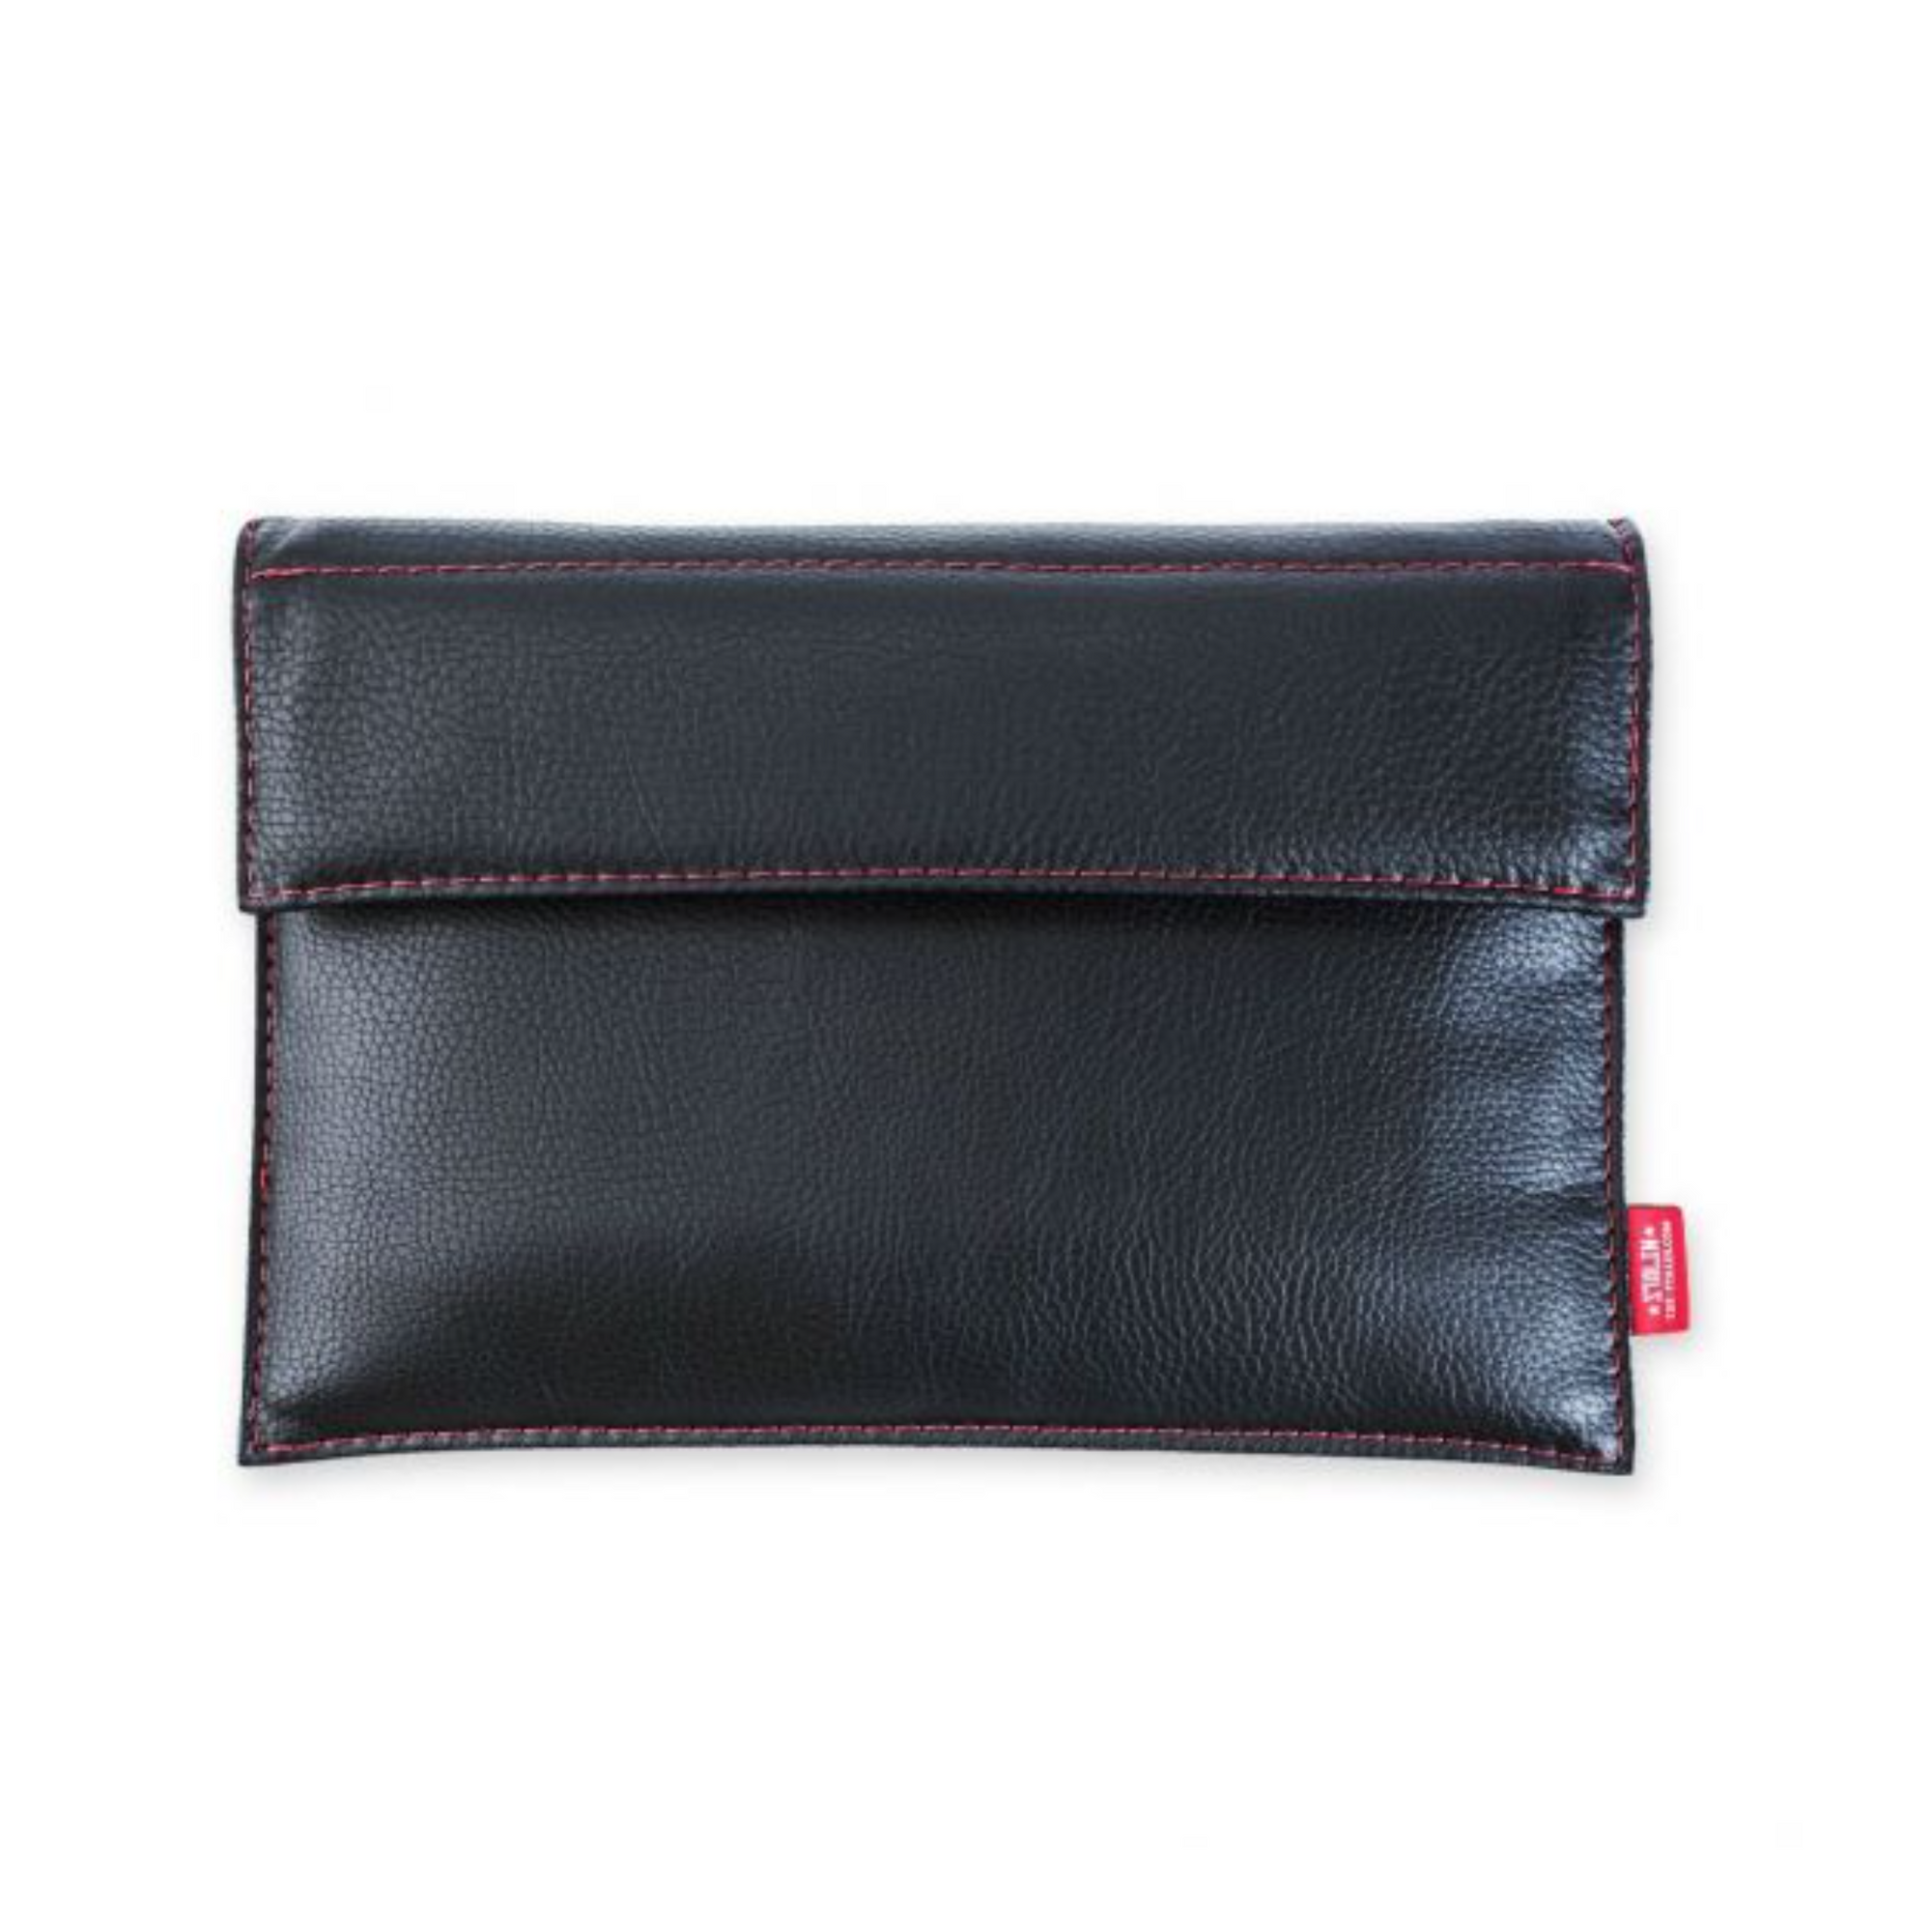 Anti-Spying Pouch